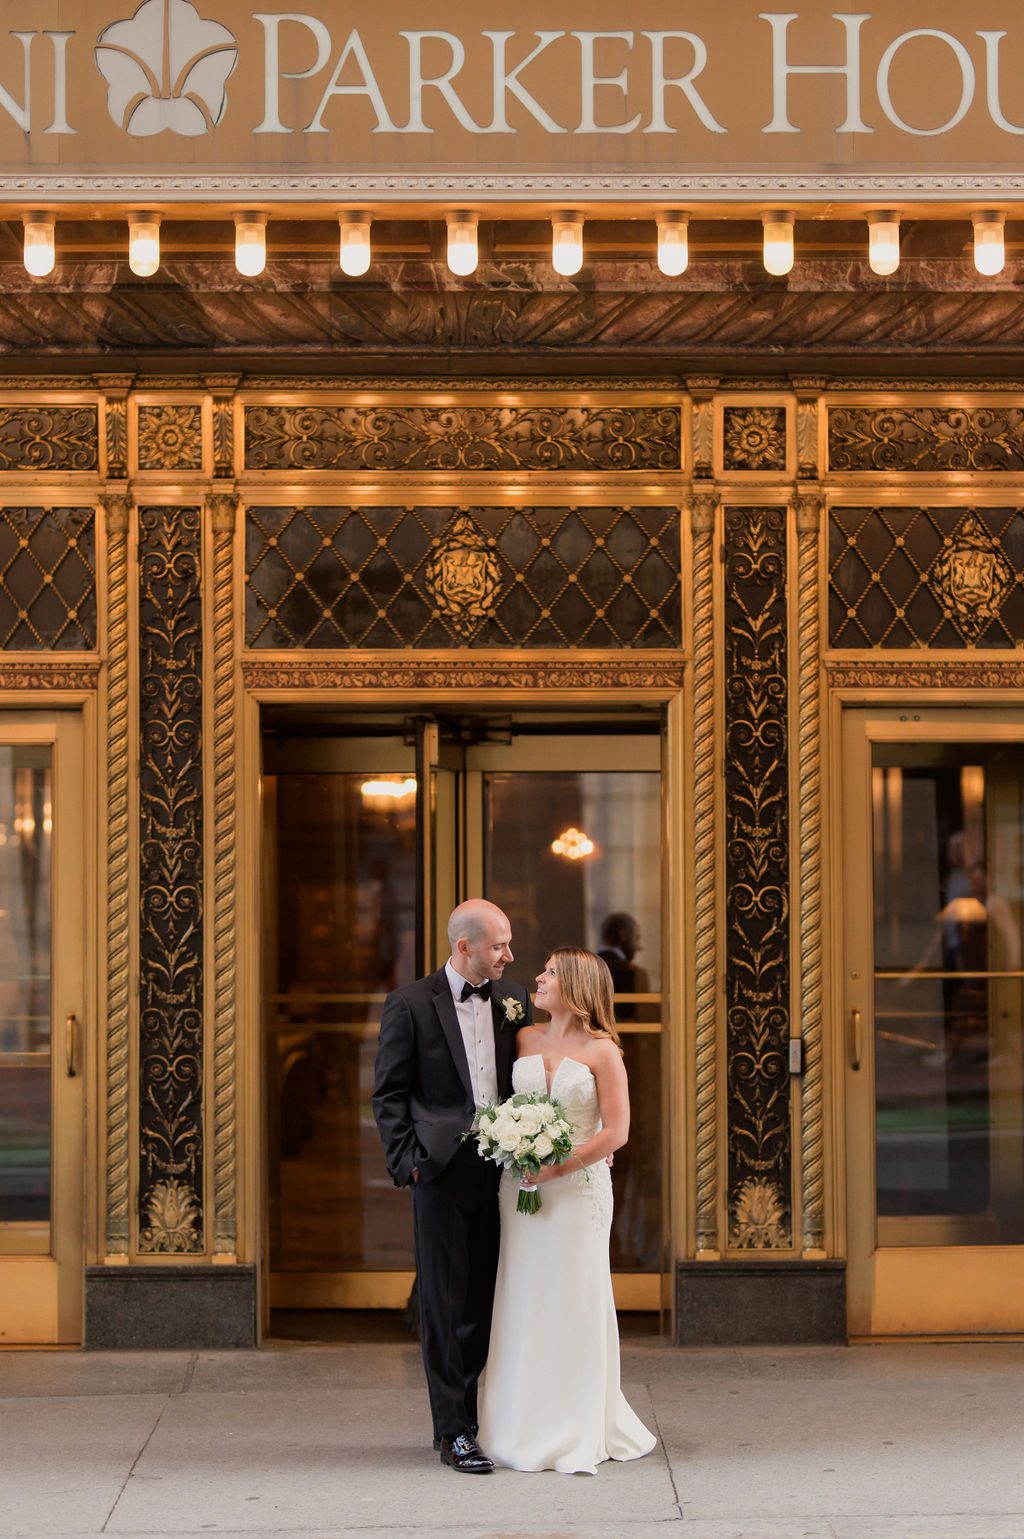 omni parker house wedding bride and groom portrait in front of hotel